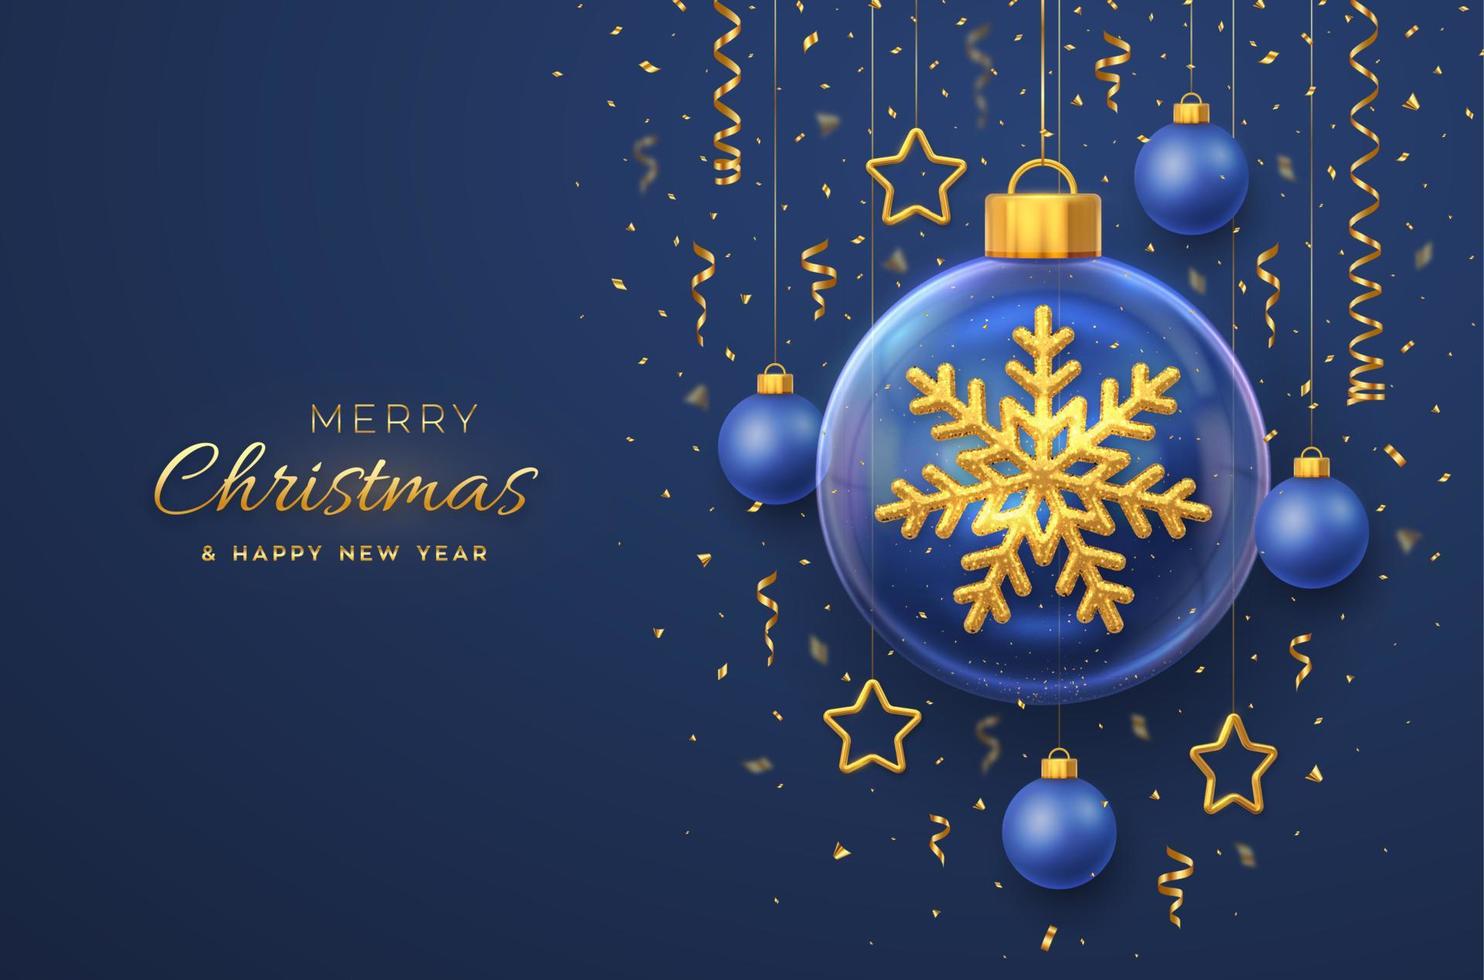 Merry christmas greeting card. Golden shining 3D snowflake in a glass bauble. Christmas blue background with hanging gold stars and balls. Holiday Xmas, New Year banner, flyer. Vector Illustration.